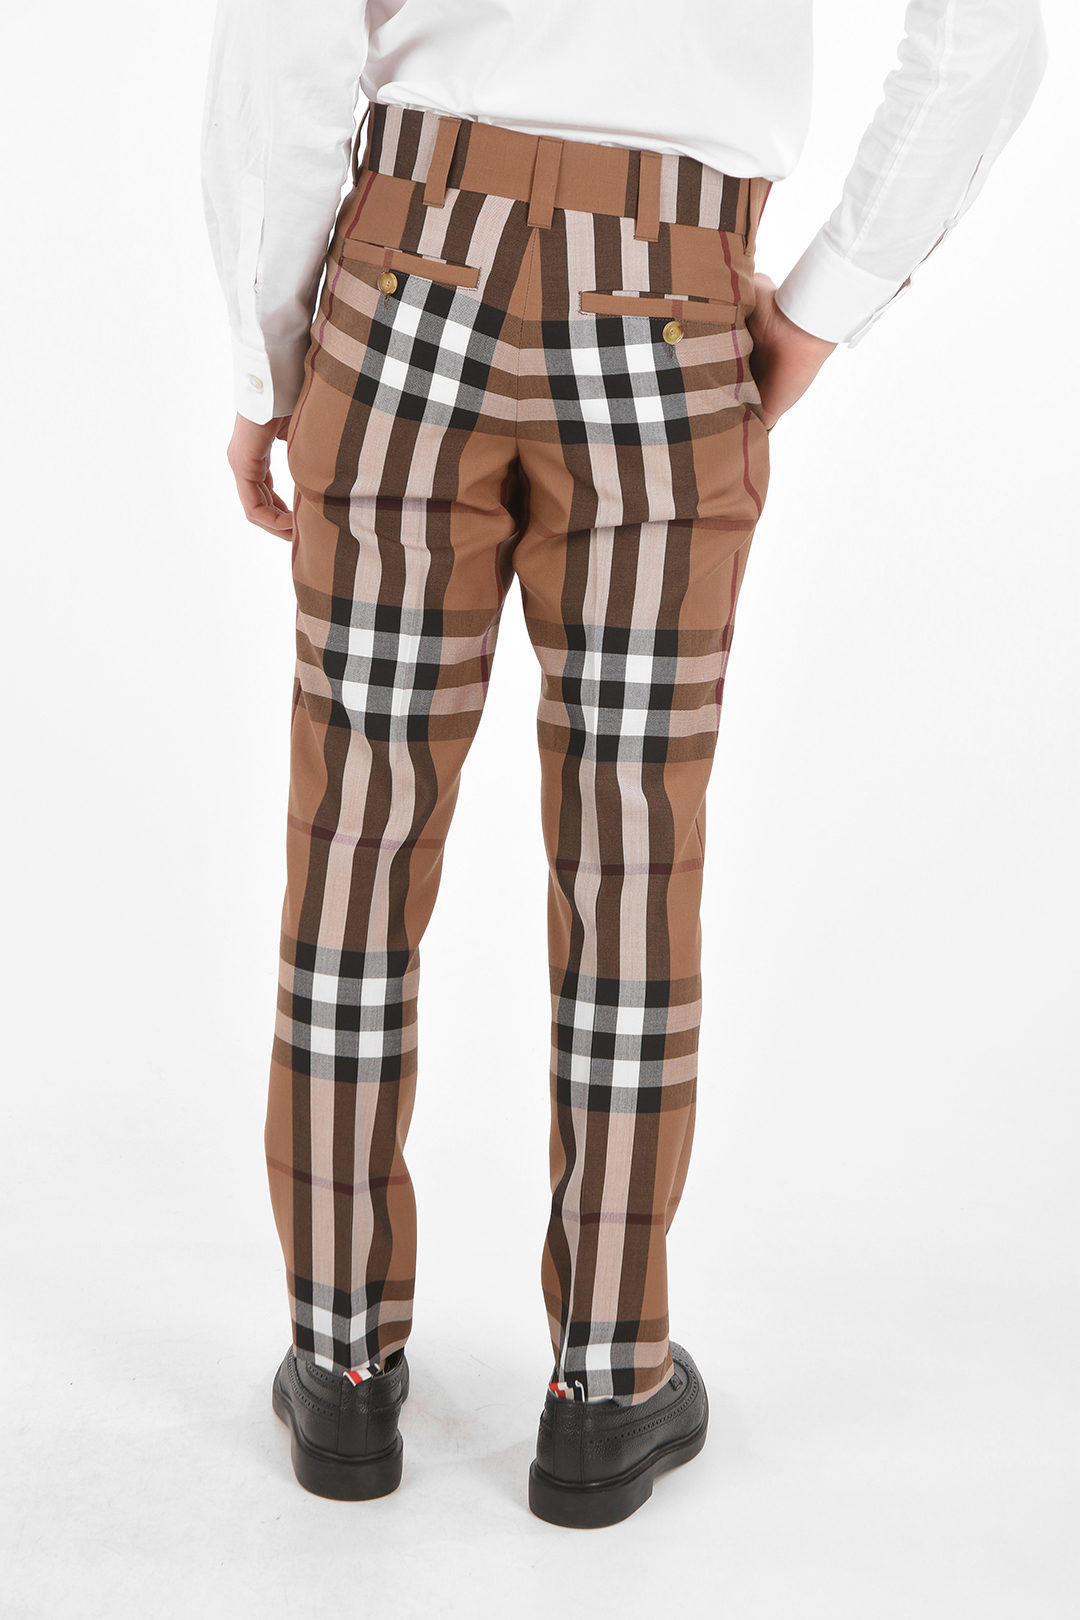 Buy Burberry Trousers & Lowers - Men | FASHIOLA INDIA